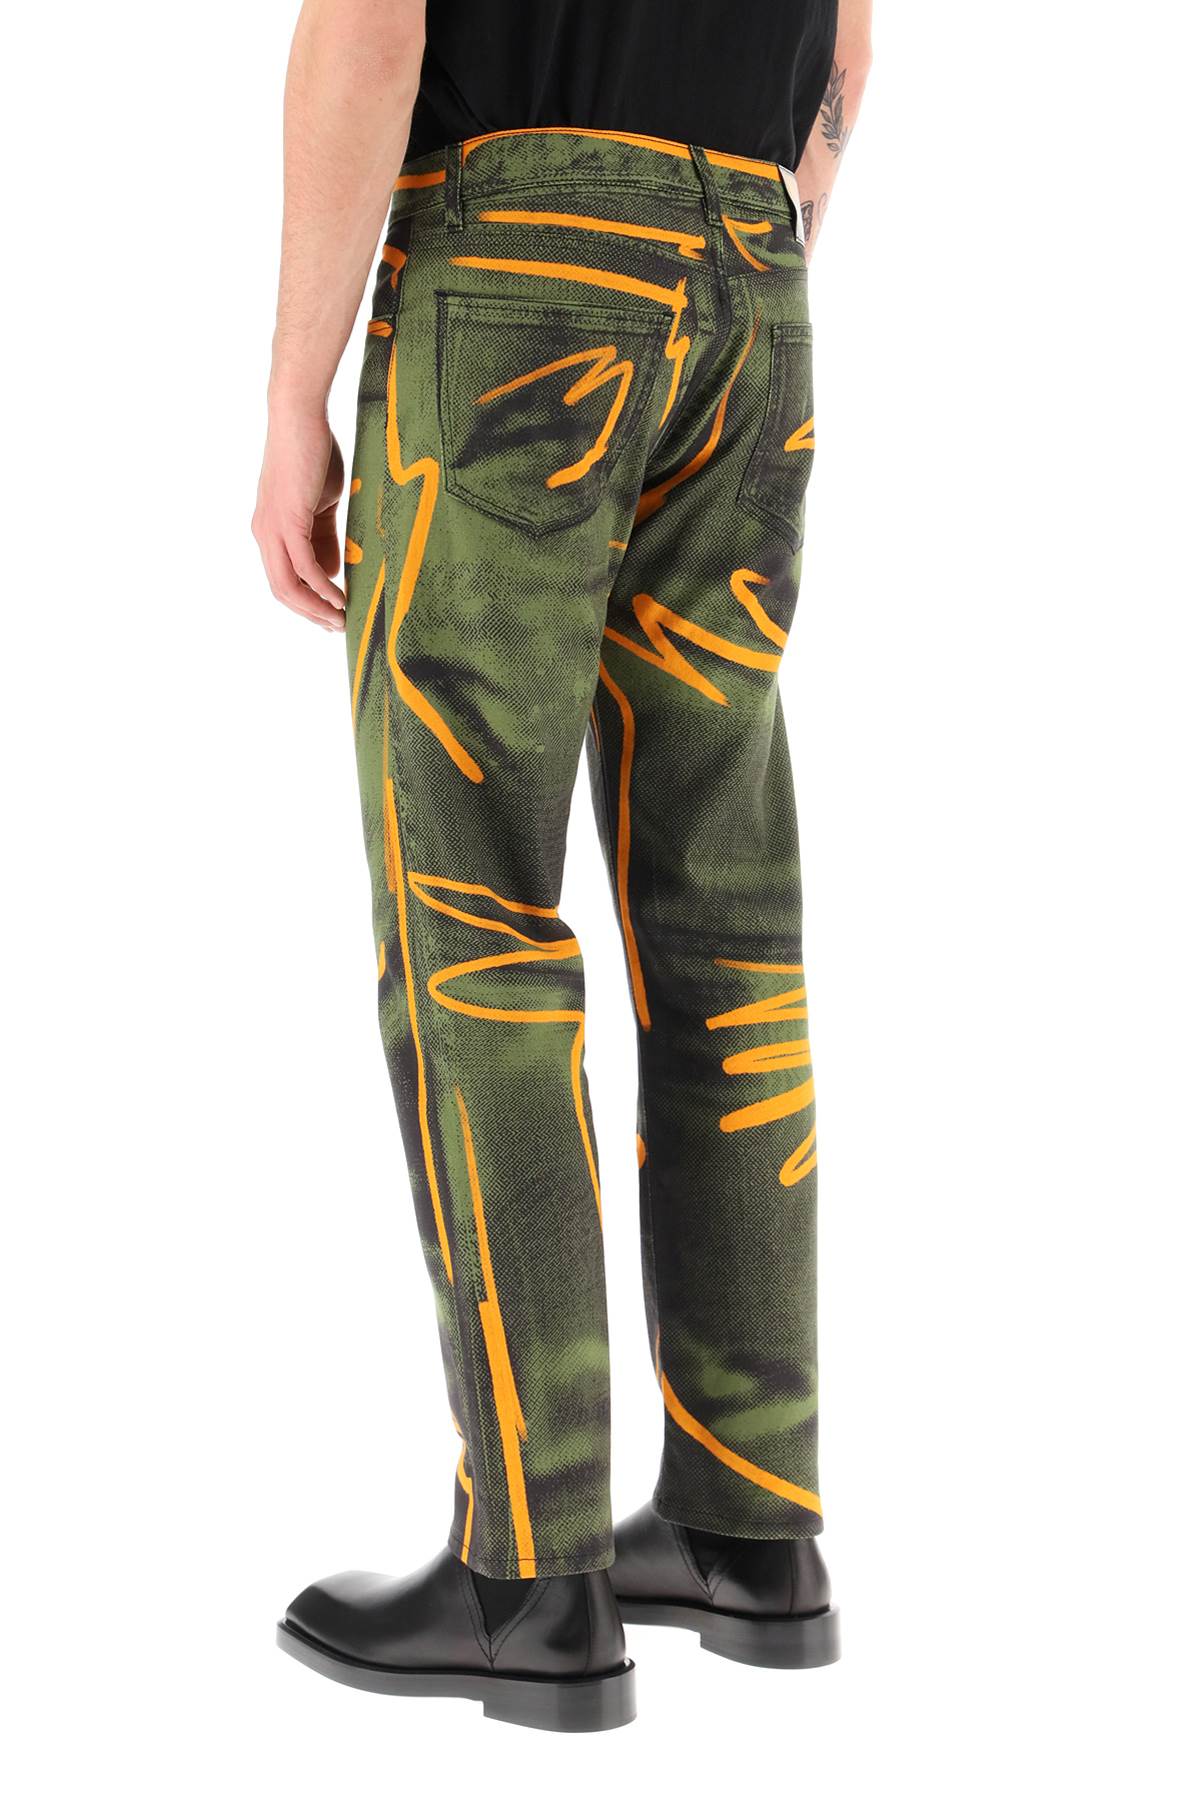 Moschino shadows & squiggles cotton pants-2